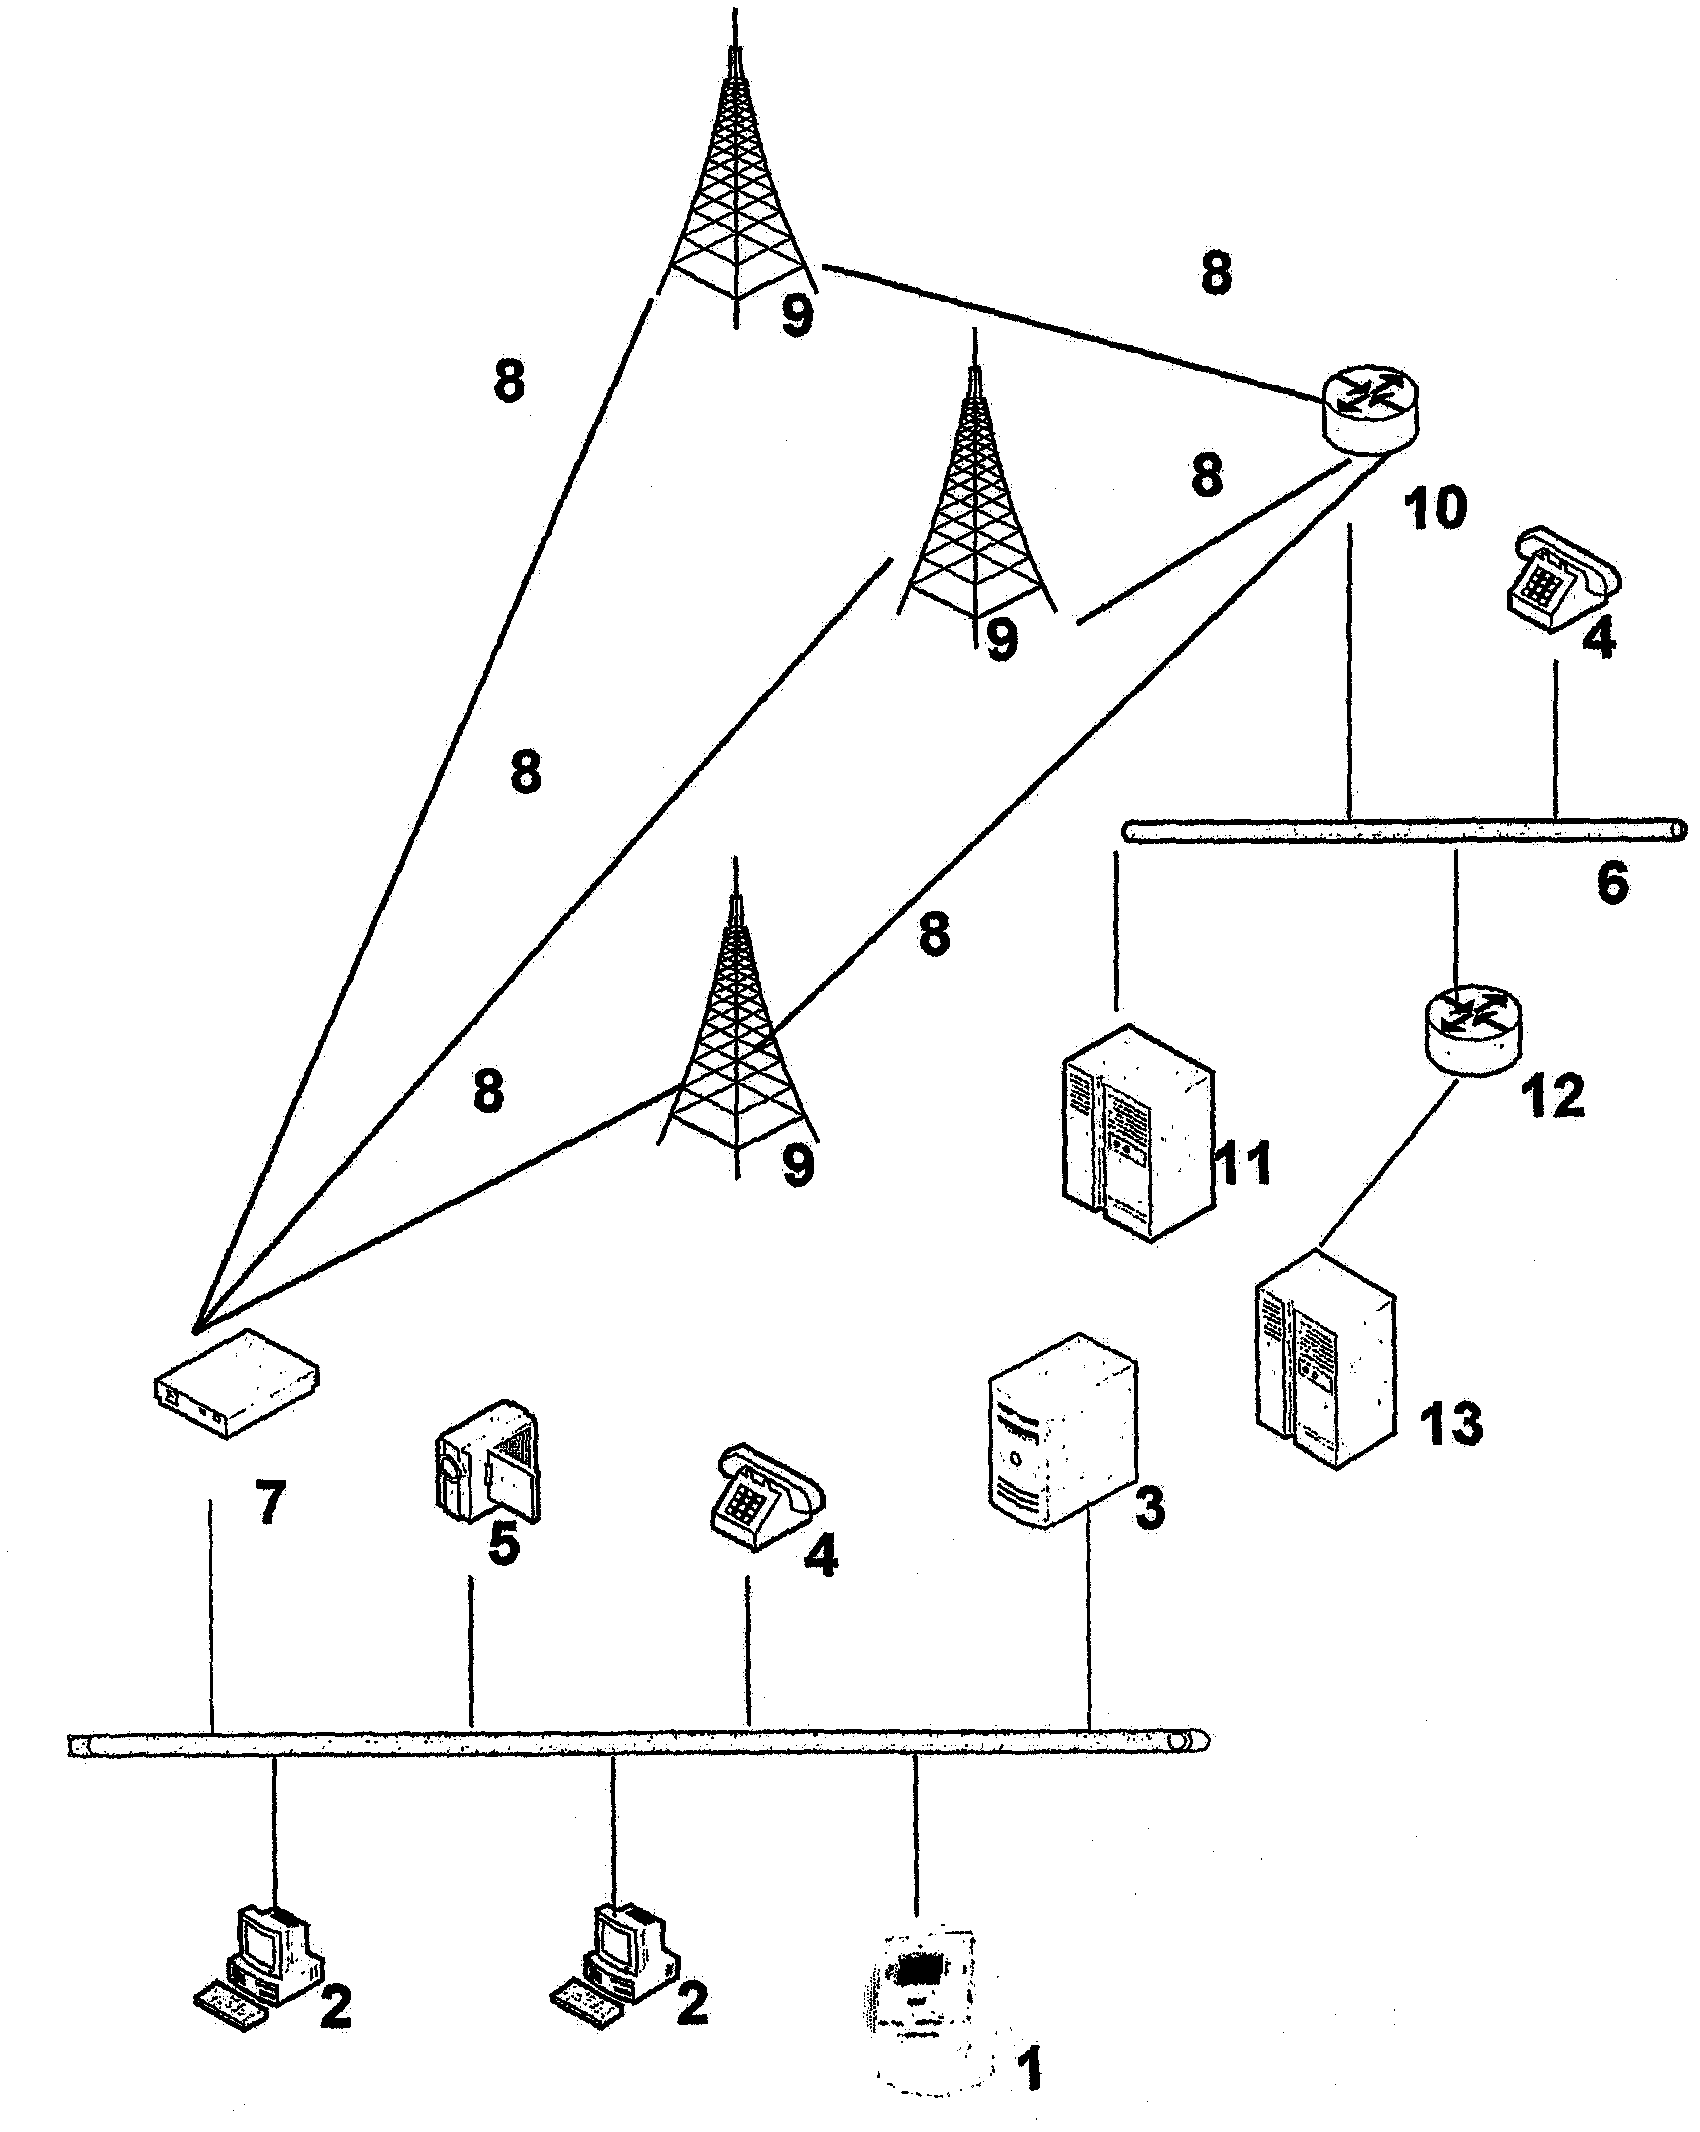 Automatic system for real time data reception and transmission to central controller